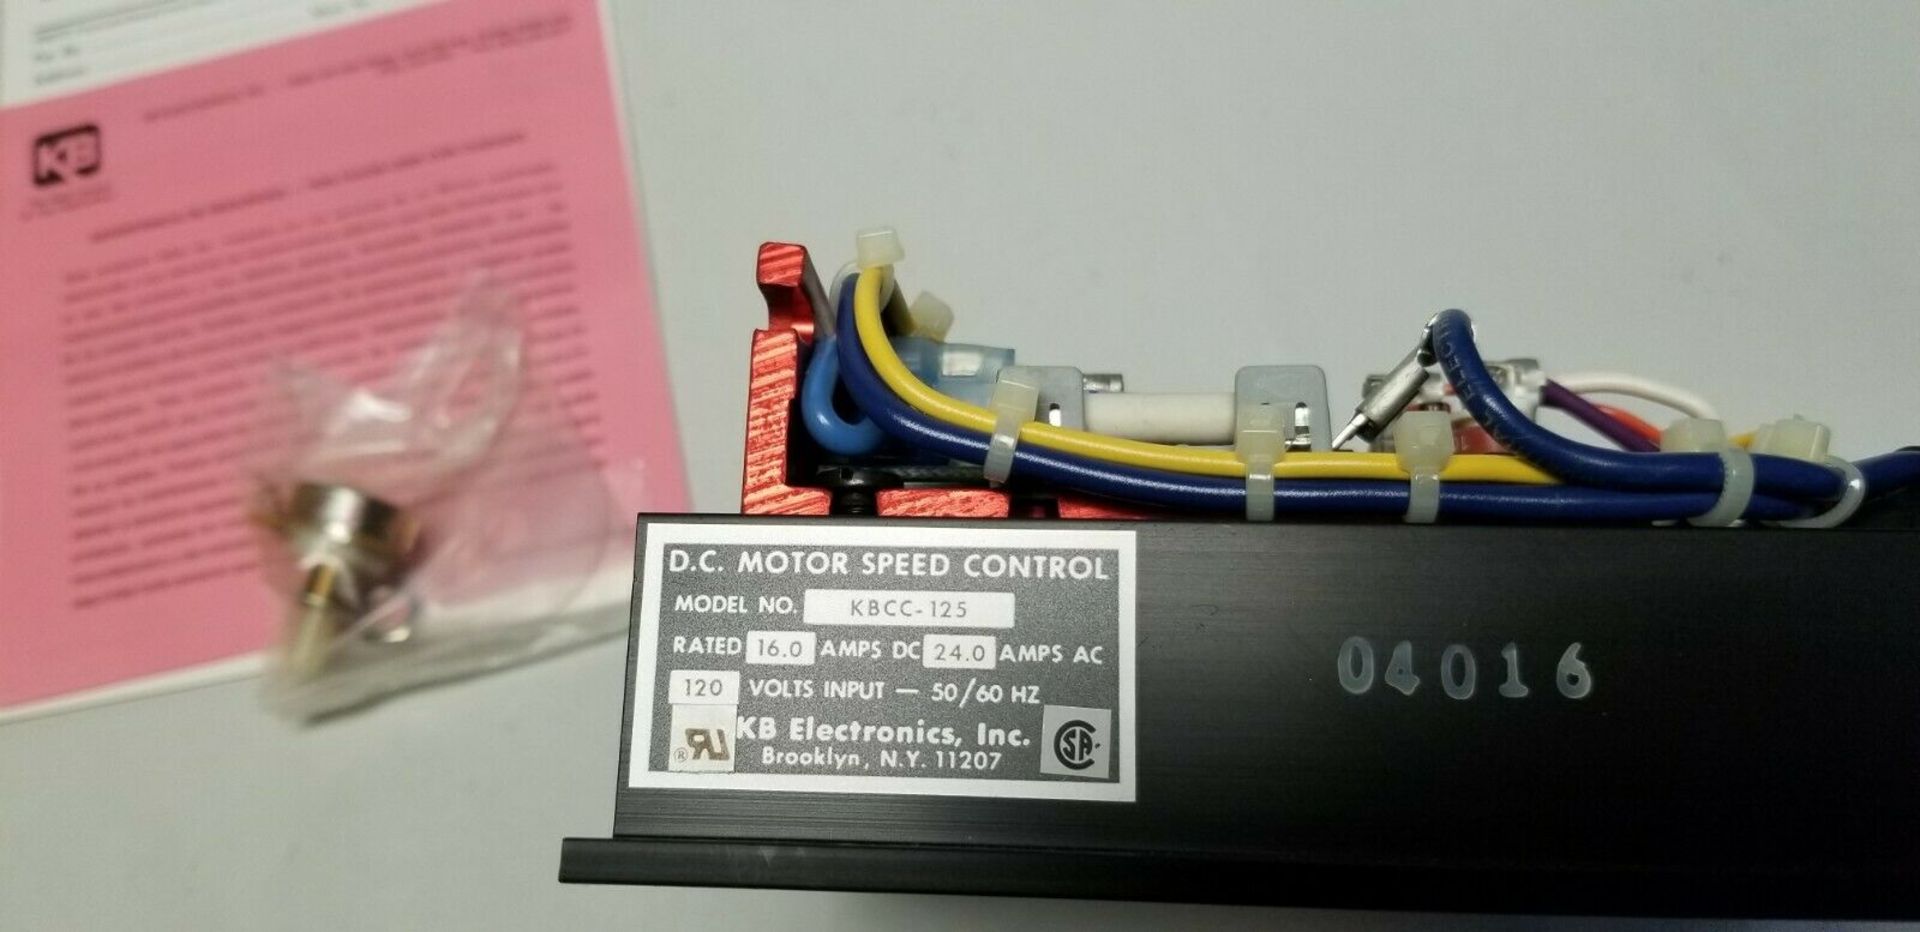 New KB DC Motor Speed Control - Image 4 of 4